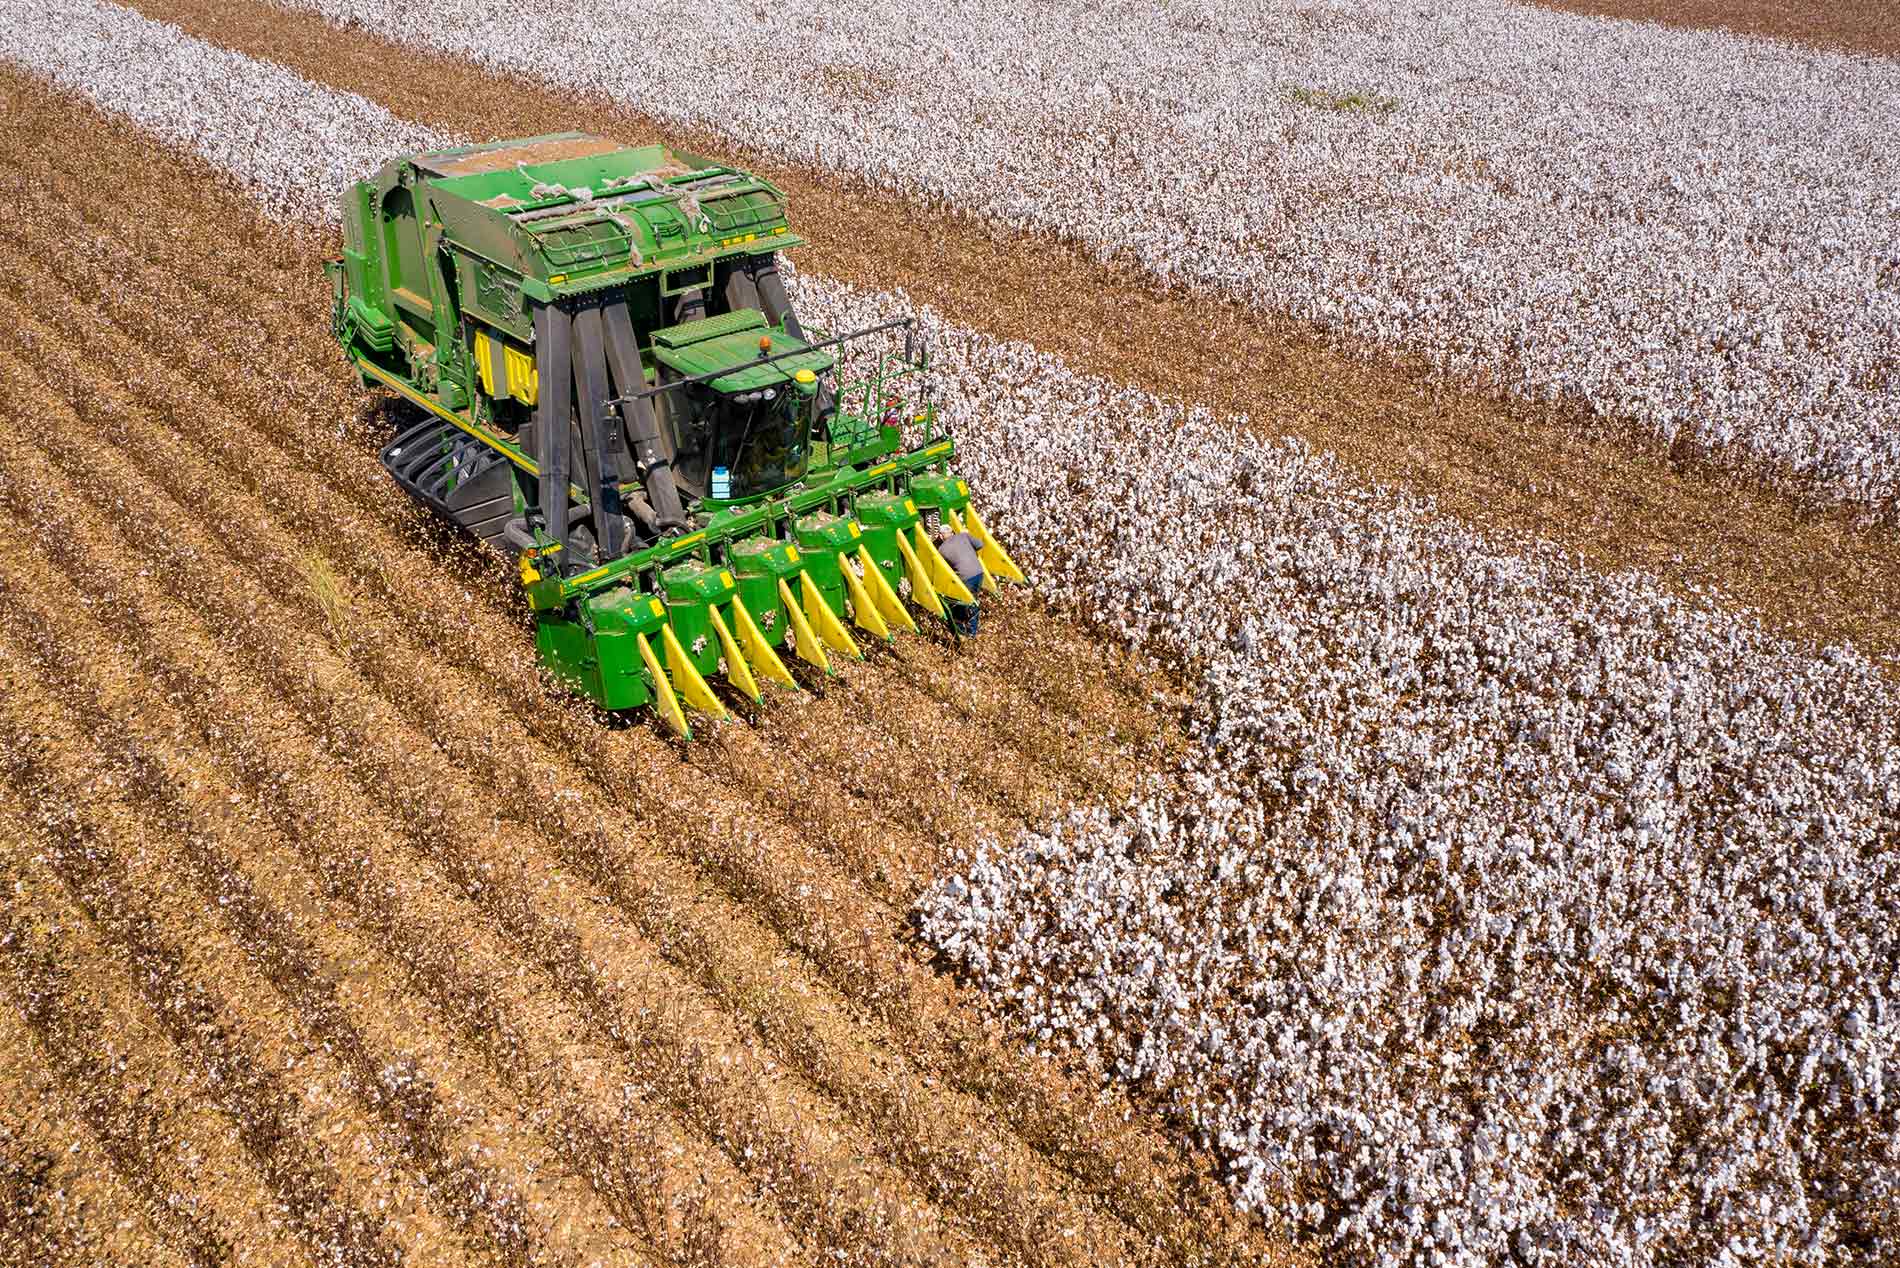 Top 10 Must-Have Cotton Picker Parts for Maximum Efficiency